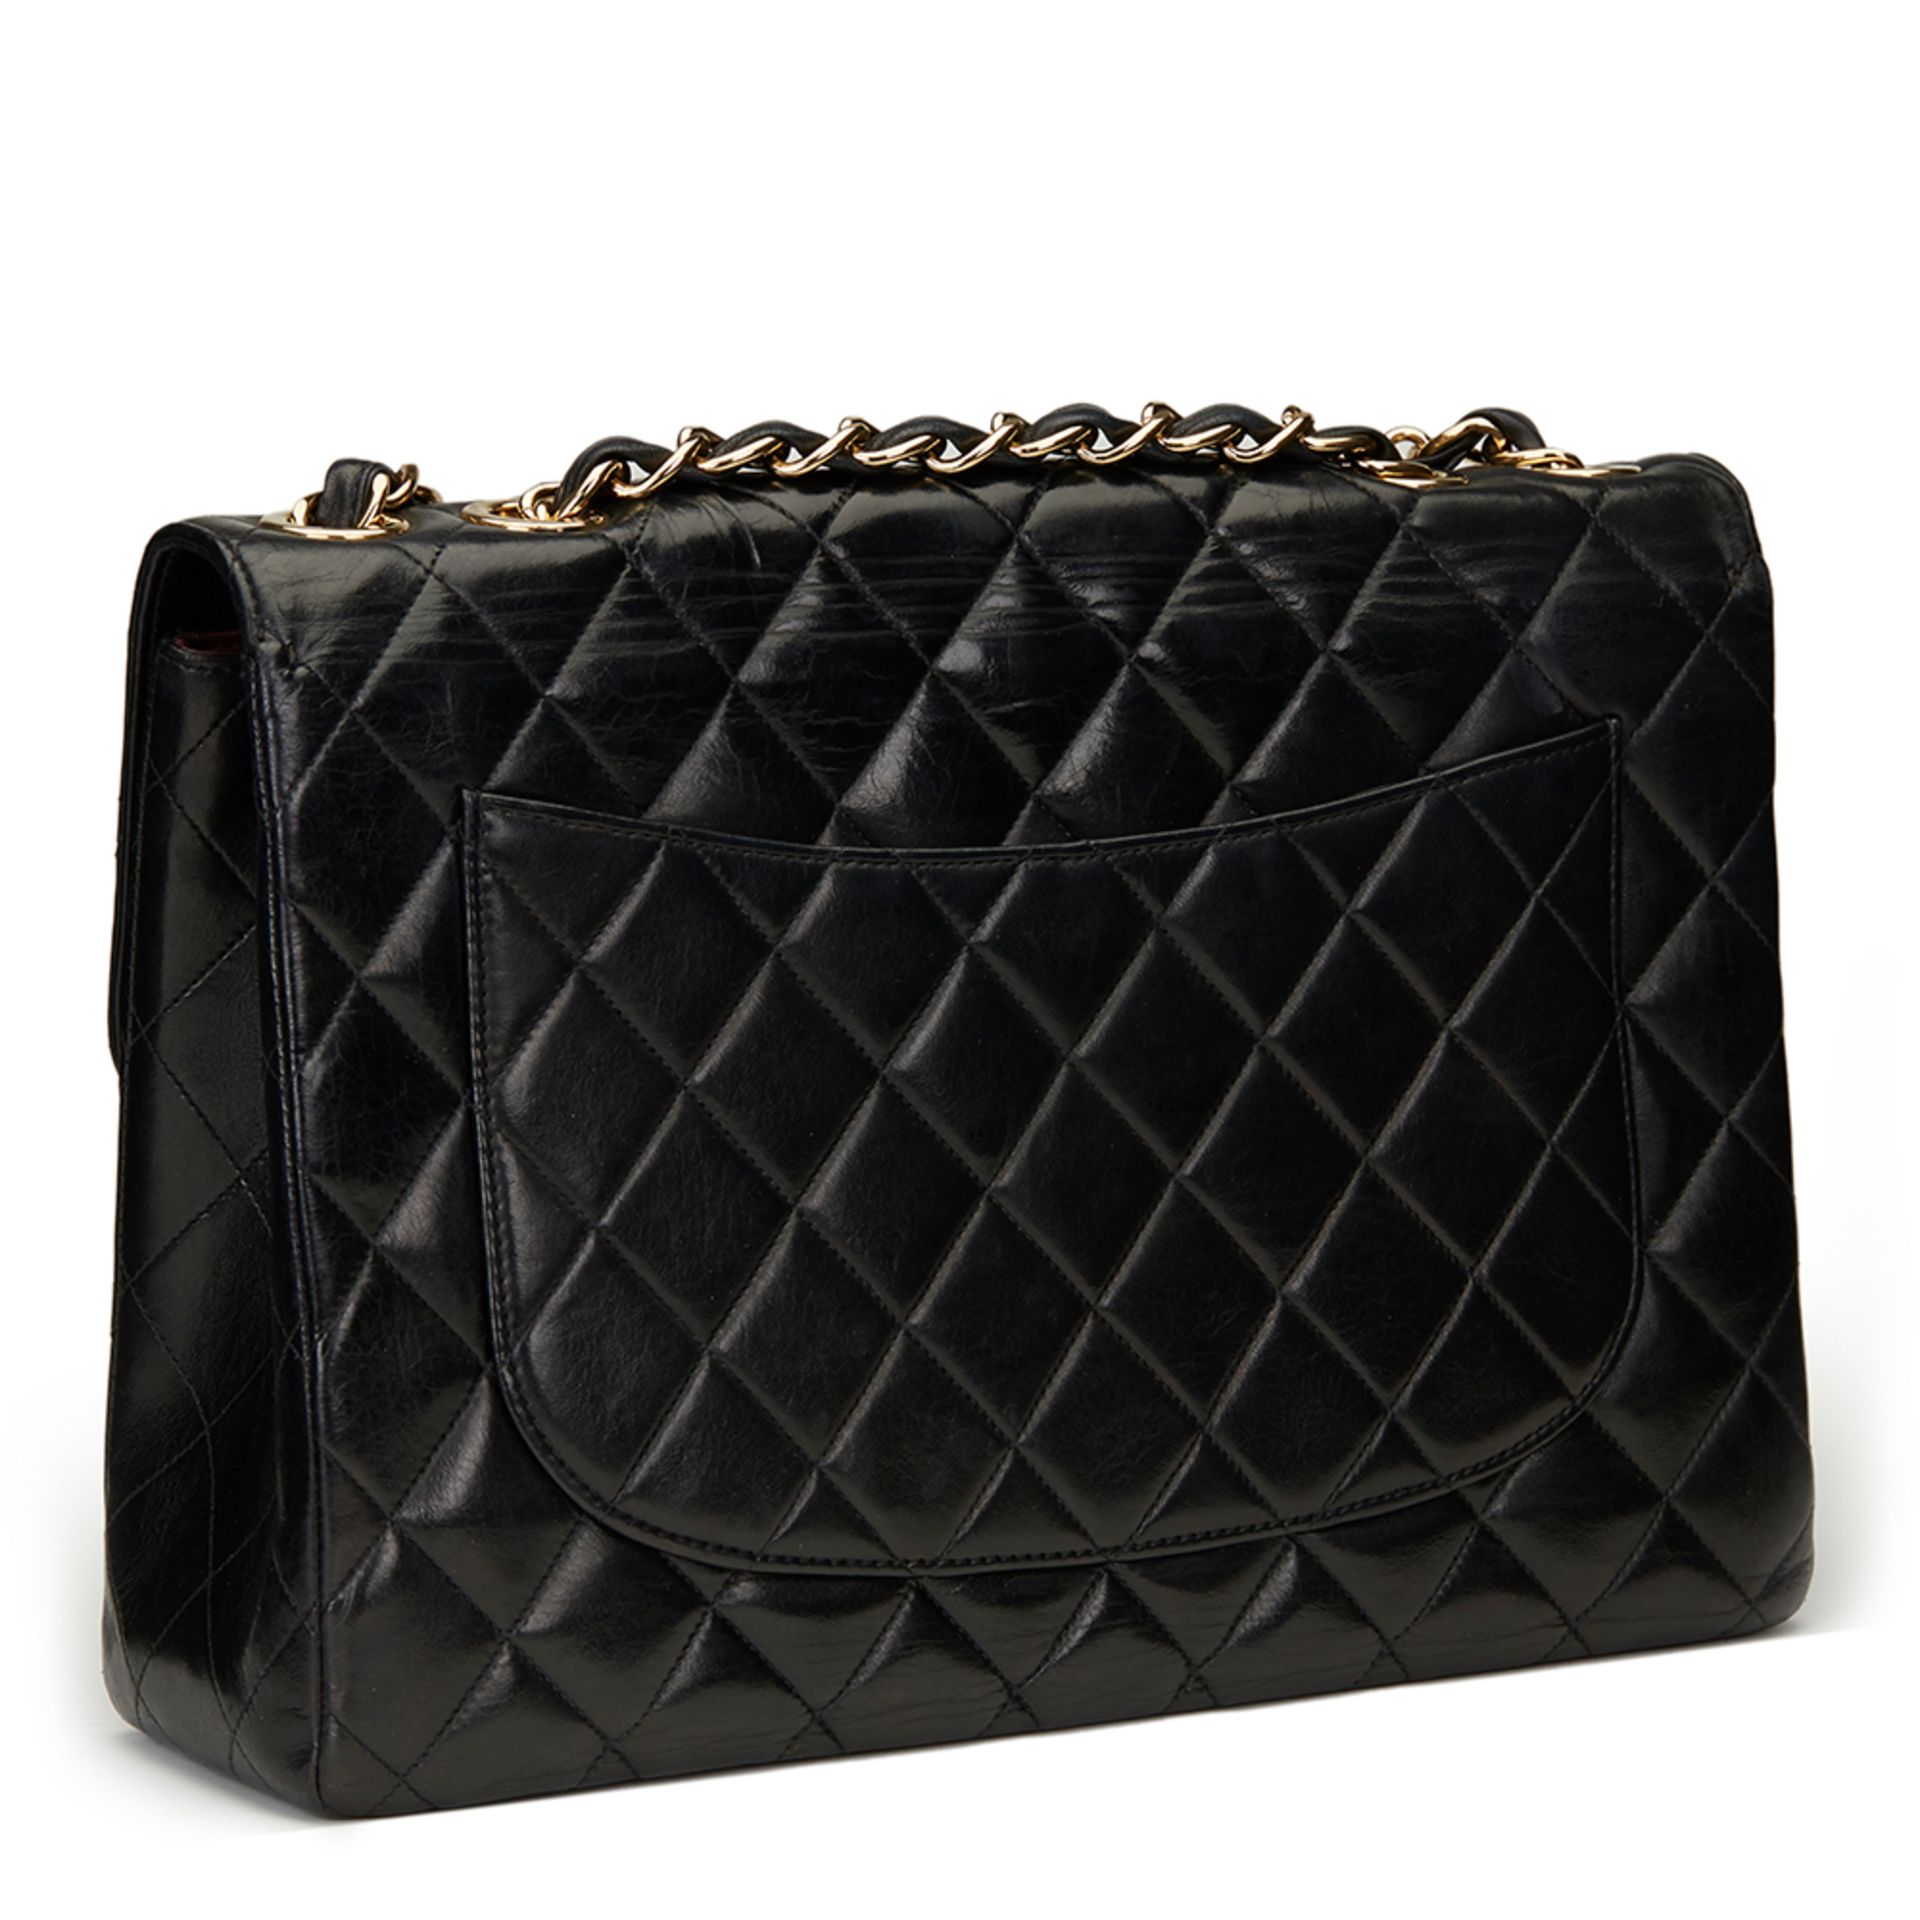 Chanel Black Quilted Lambskin Jumbo Classic Single Flap Bag - Image 3 of 11